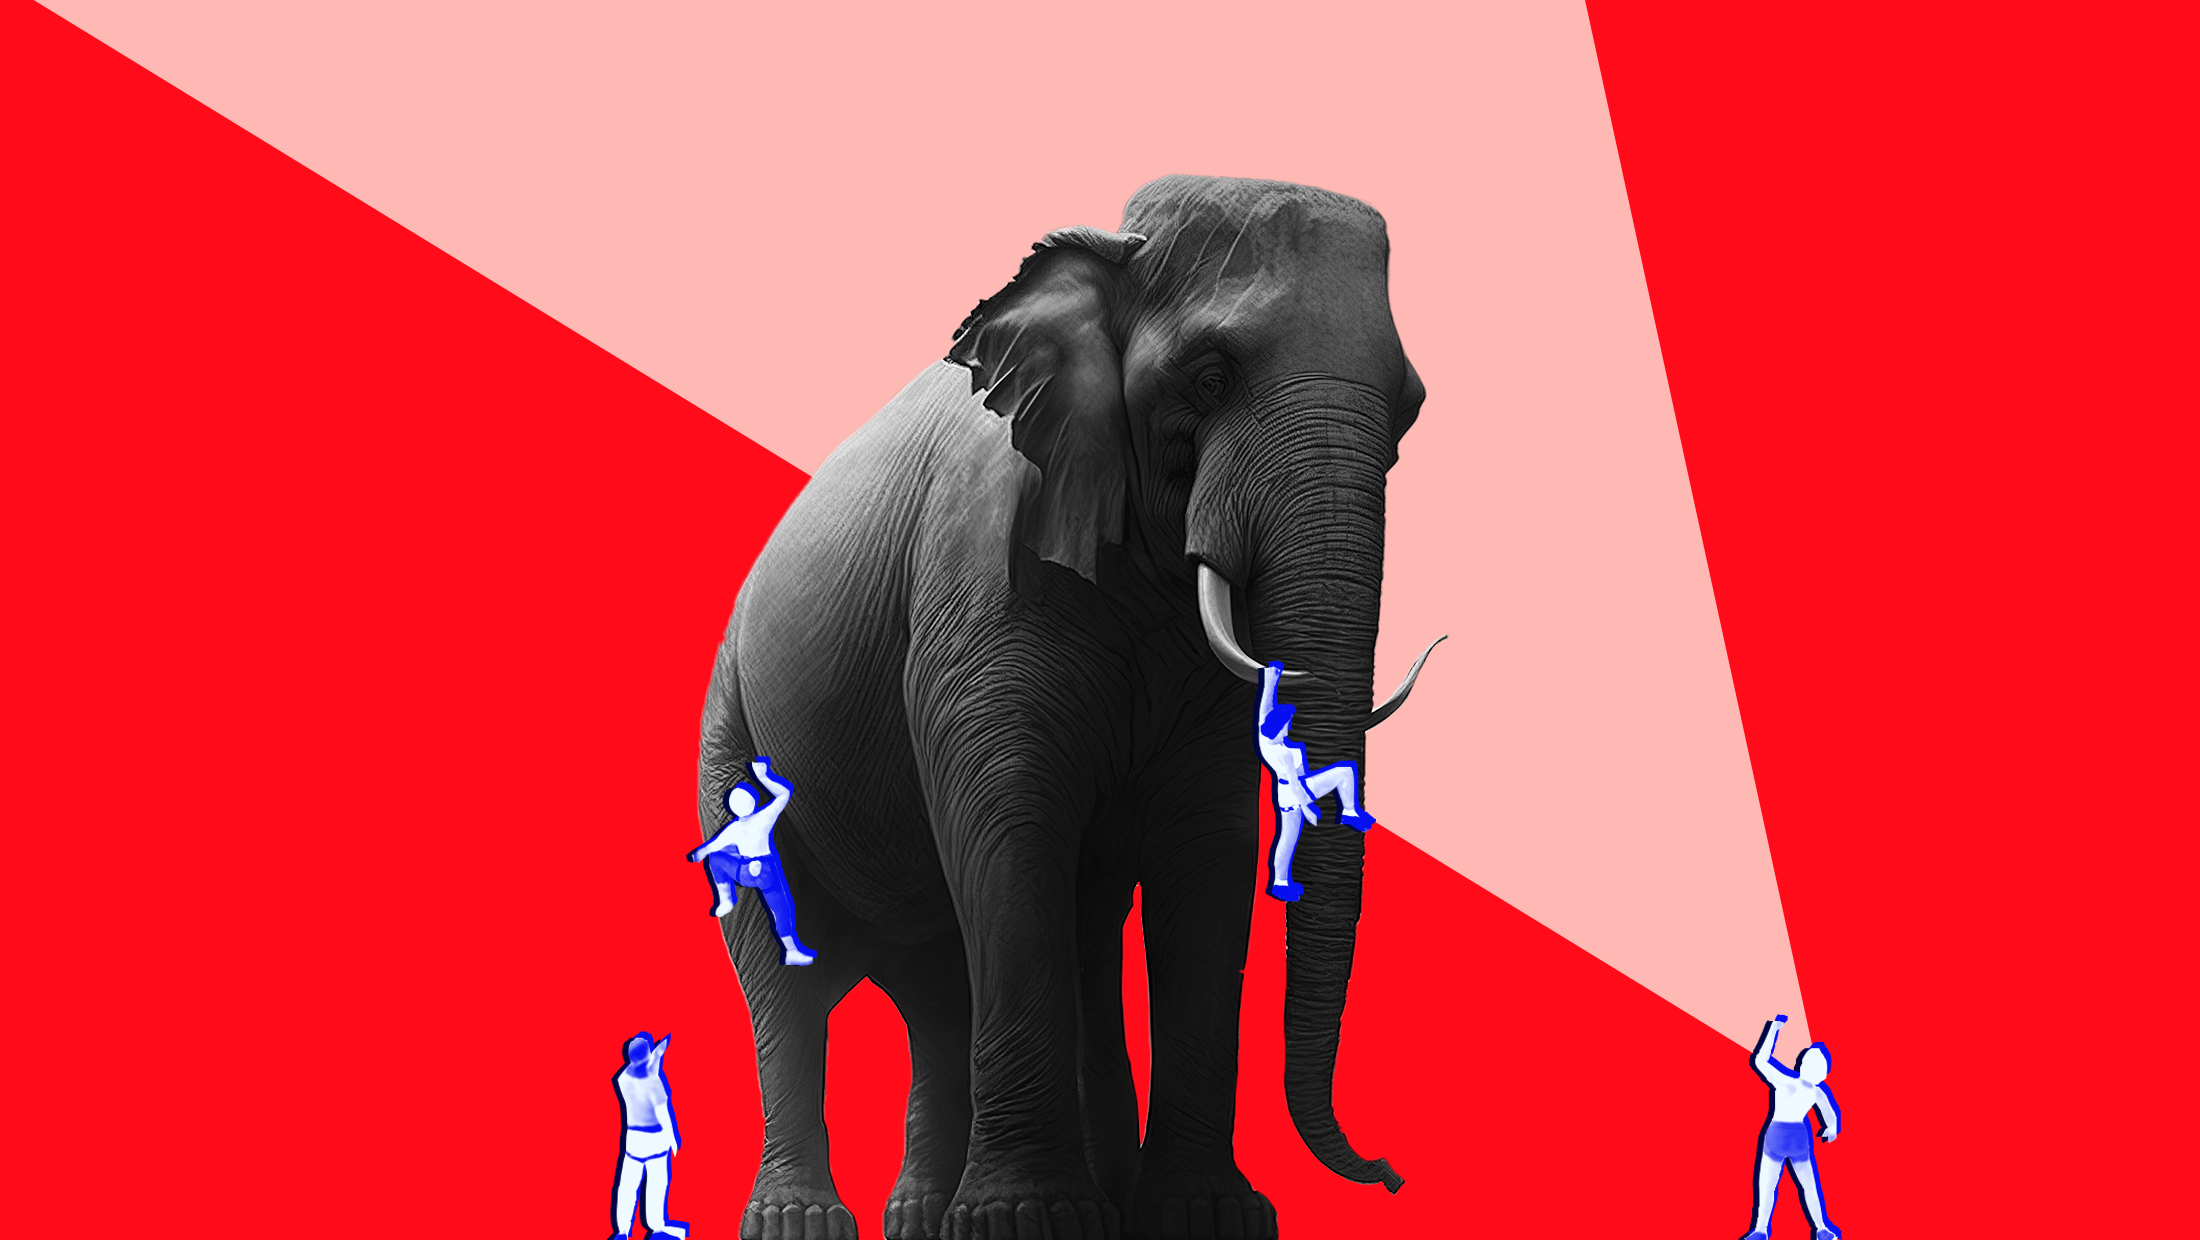 Red background with black and white toned image of an elephant and blue-toned people climbing on the elephant and one person with a lighter red toned spotlight coming out of its mouth.